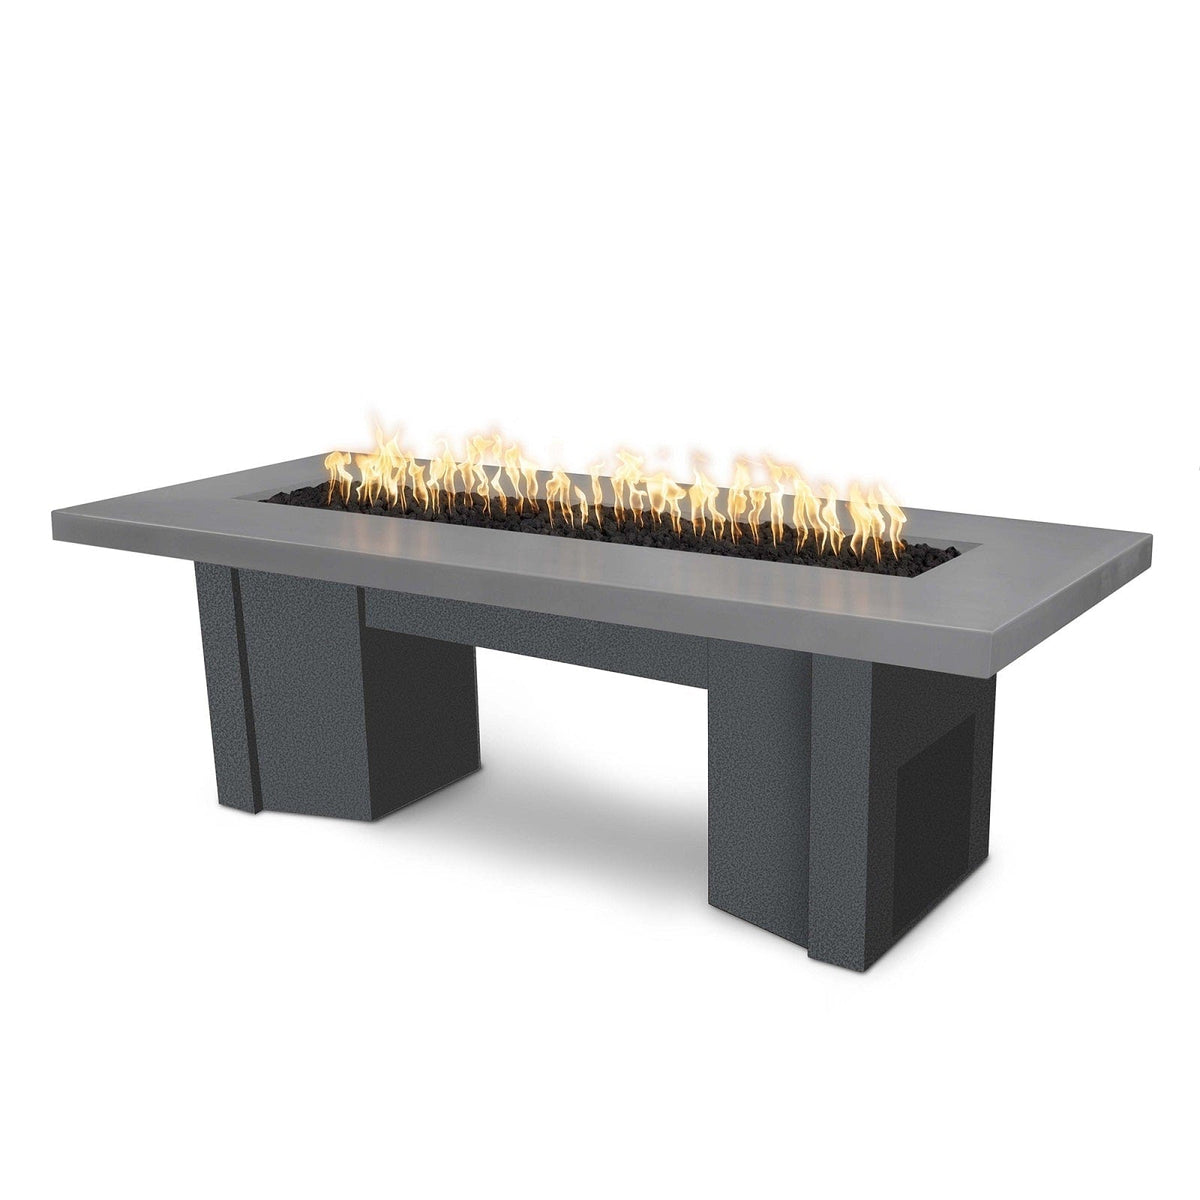 The Outdoor Plus Fire Features Natural Gray (-NGY) / Silver Vein Powder Coated Steel (-SLV) The Outdoor Plus 60&quot; Alameda Fire Table Smooth Concrete in Natural Gas - Flame Sense System with Push Button Spark Igniter / OPT-ALMGFRC60FSEN-NG